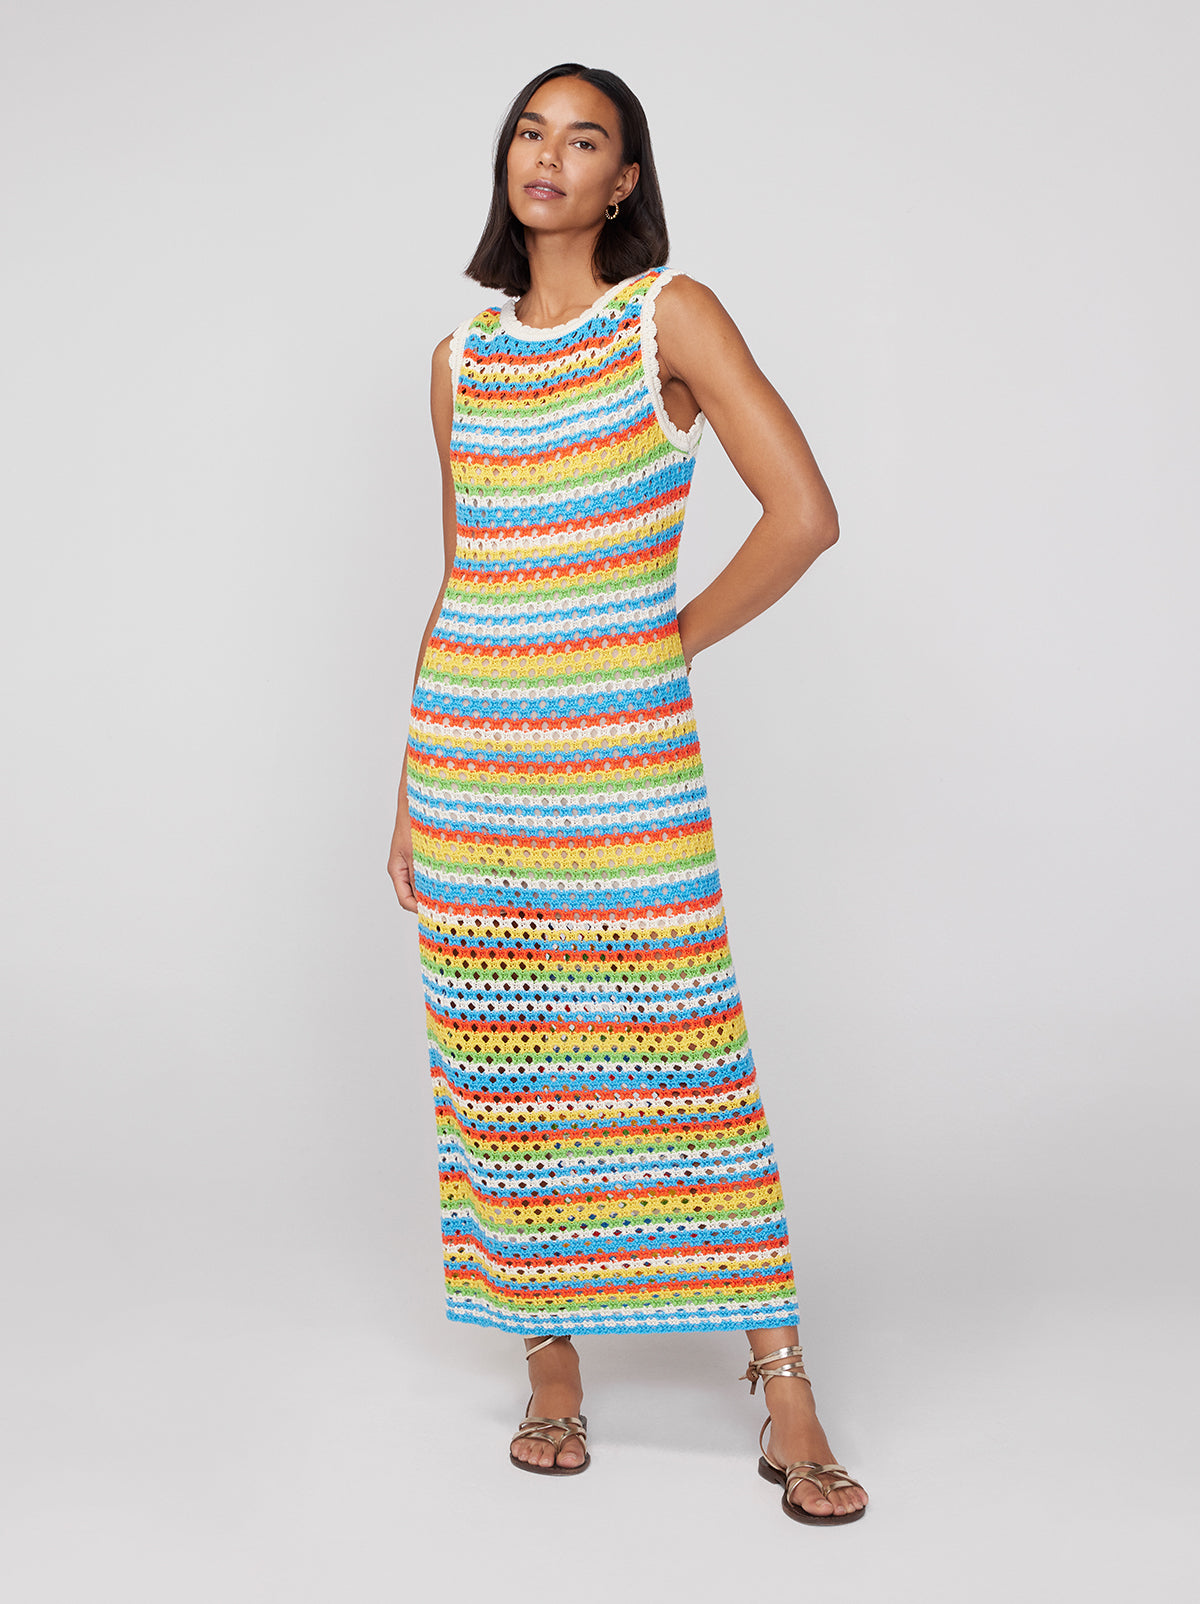 alt="Bunty Blue Stripe Crochet Knit Dress By KITRI Studio with a flattering fit around the chest and straight fit in the skirt. An ideal beach midi dress to throw over a swimsuit it features a summary rainbow pattern with colourful horizontal lines in 100% cotton crochet knitted design"